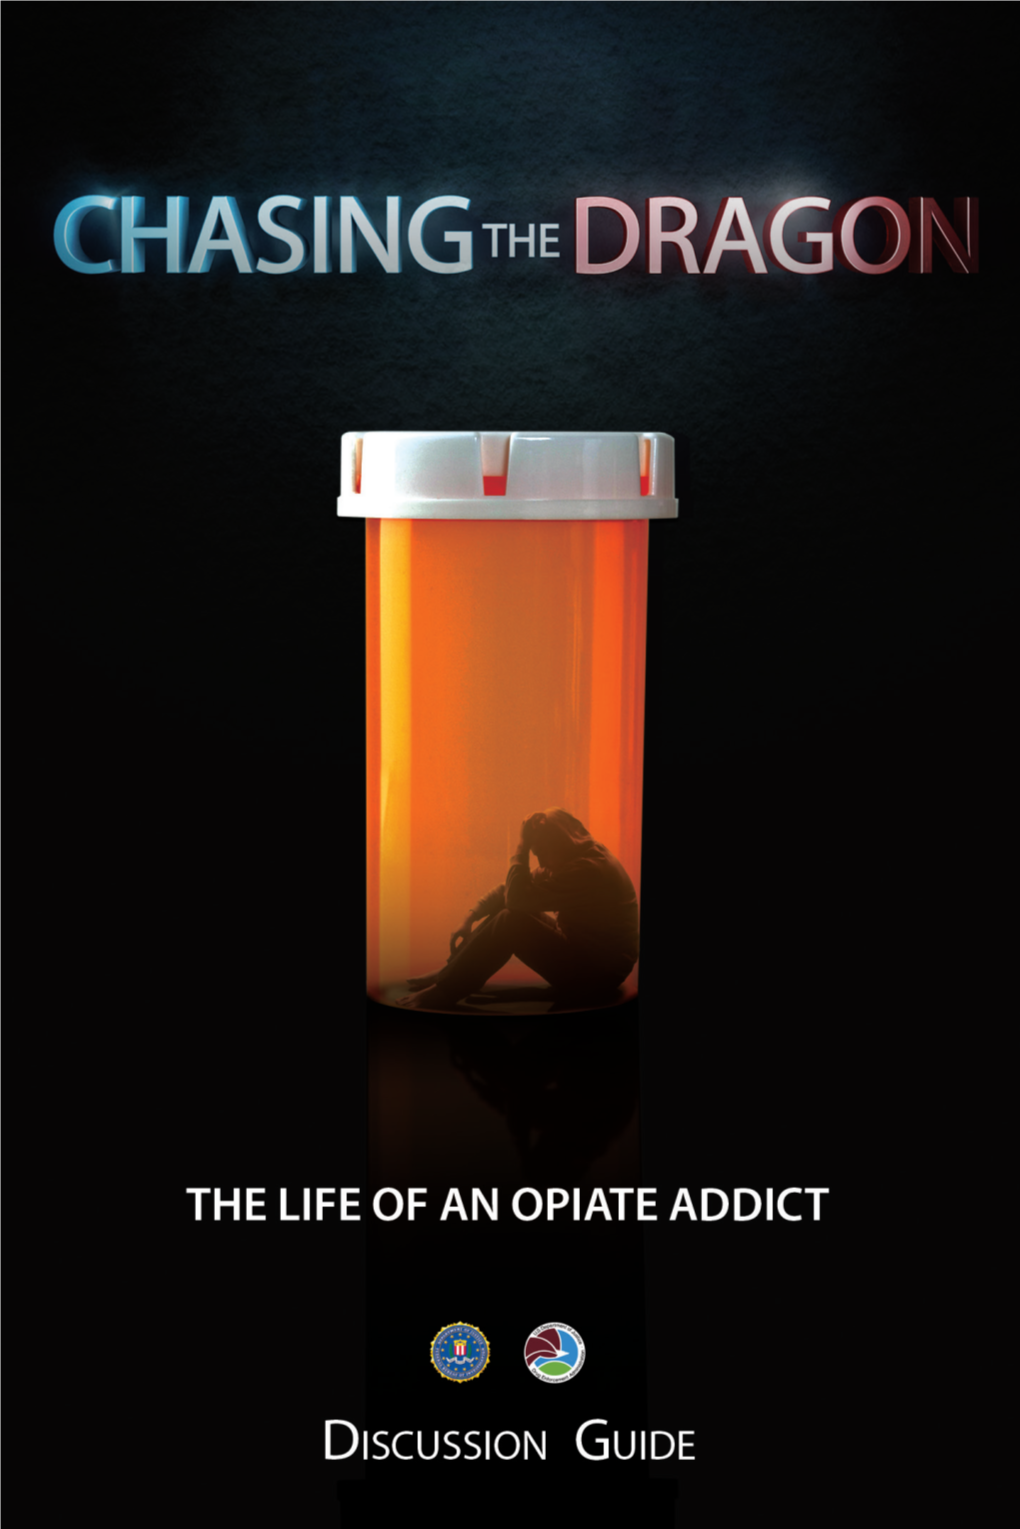 Chasing the Dragon: the Life of an Opiate Addict Into Your School’S Curriculum